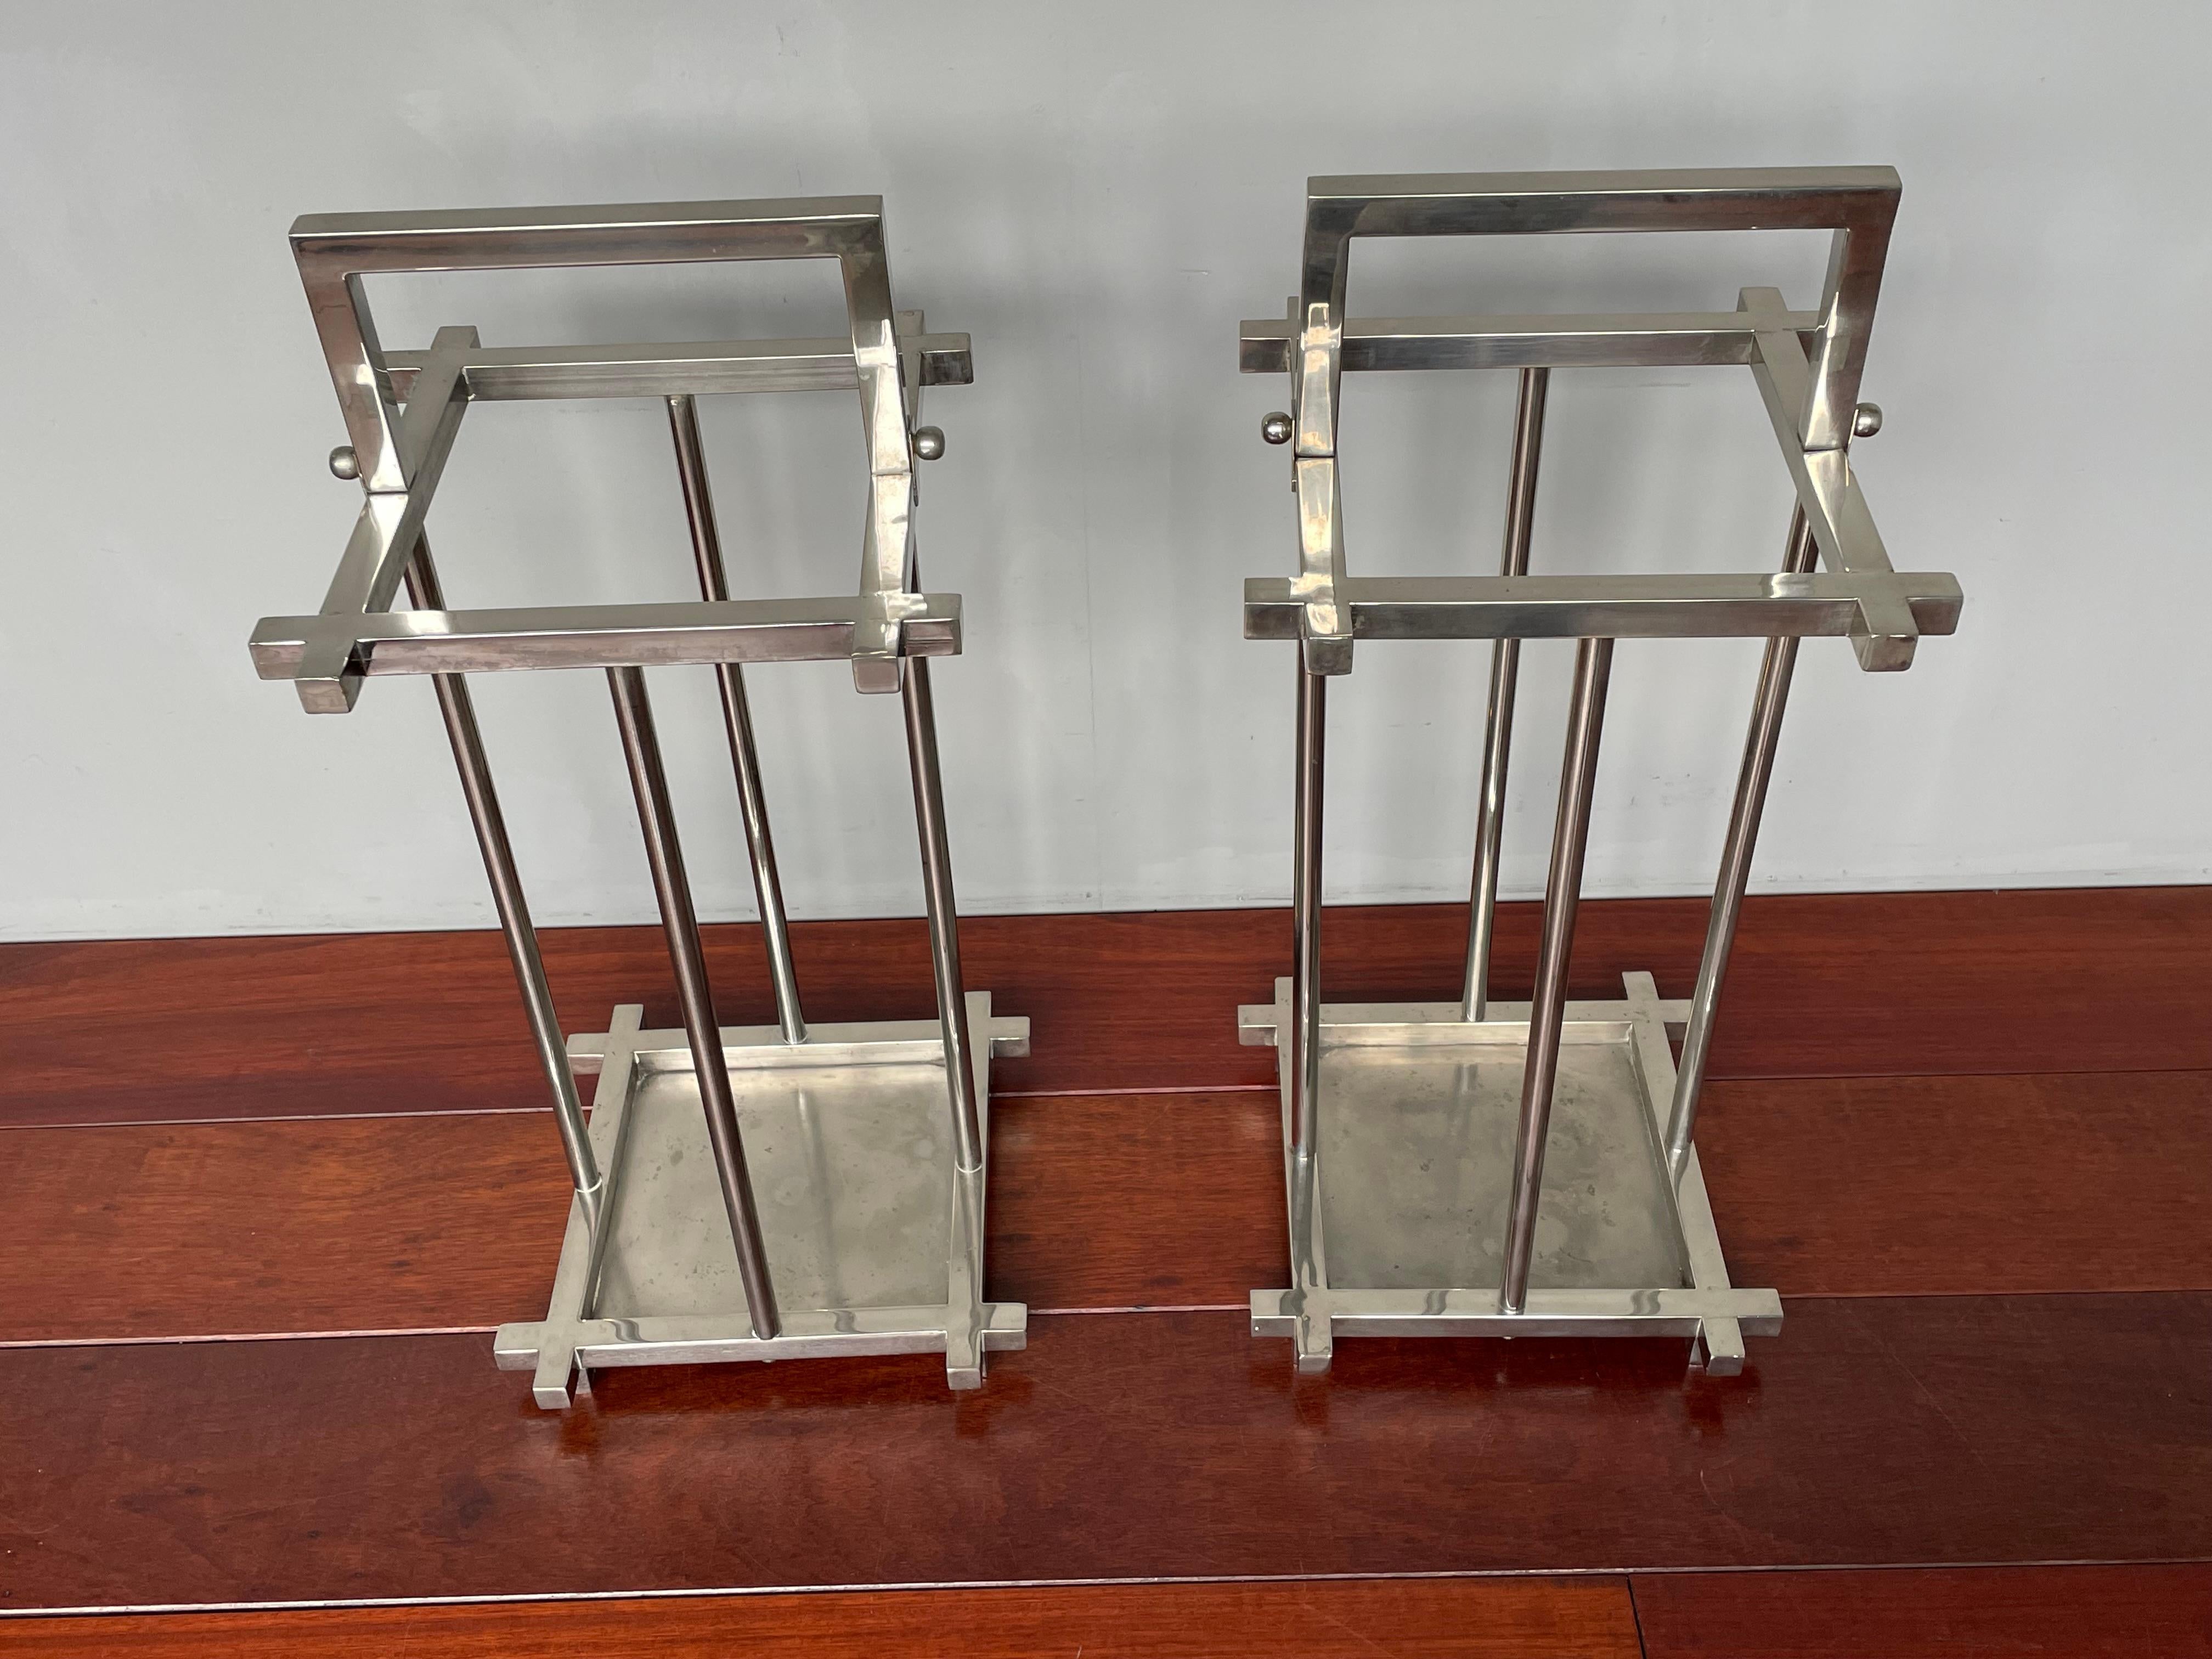 Unique pair of Mid-Century umbrella stands.

This stylish and timeless pair of handcrafted umbrella and stick stands is another one of our recent great finds. We had never seen even one such beautiful stand and to have found a pair again felt like a